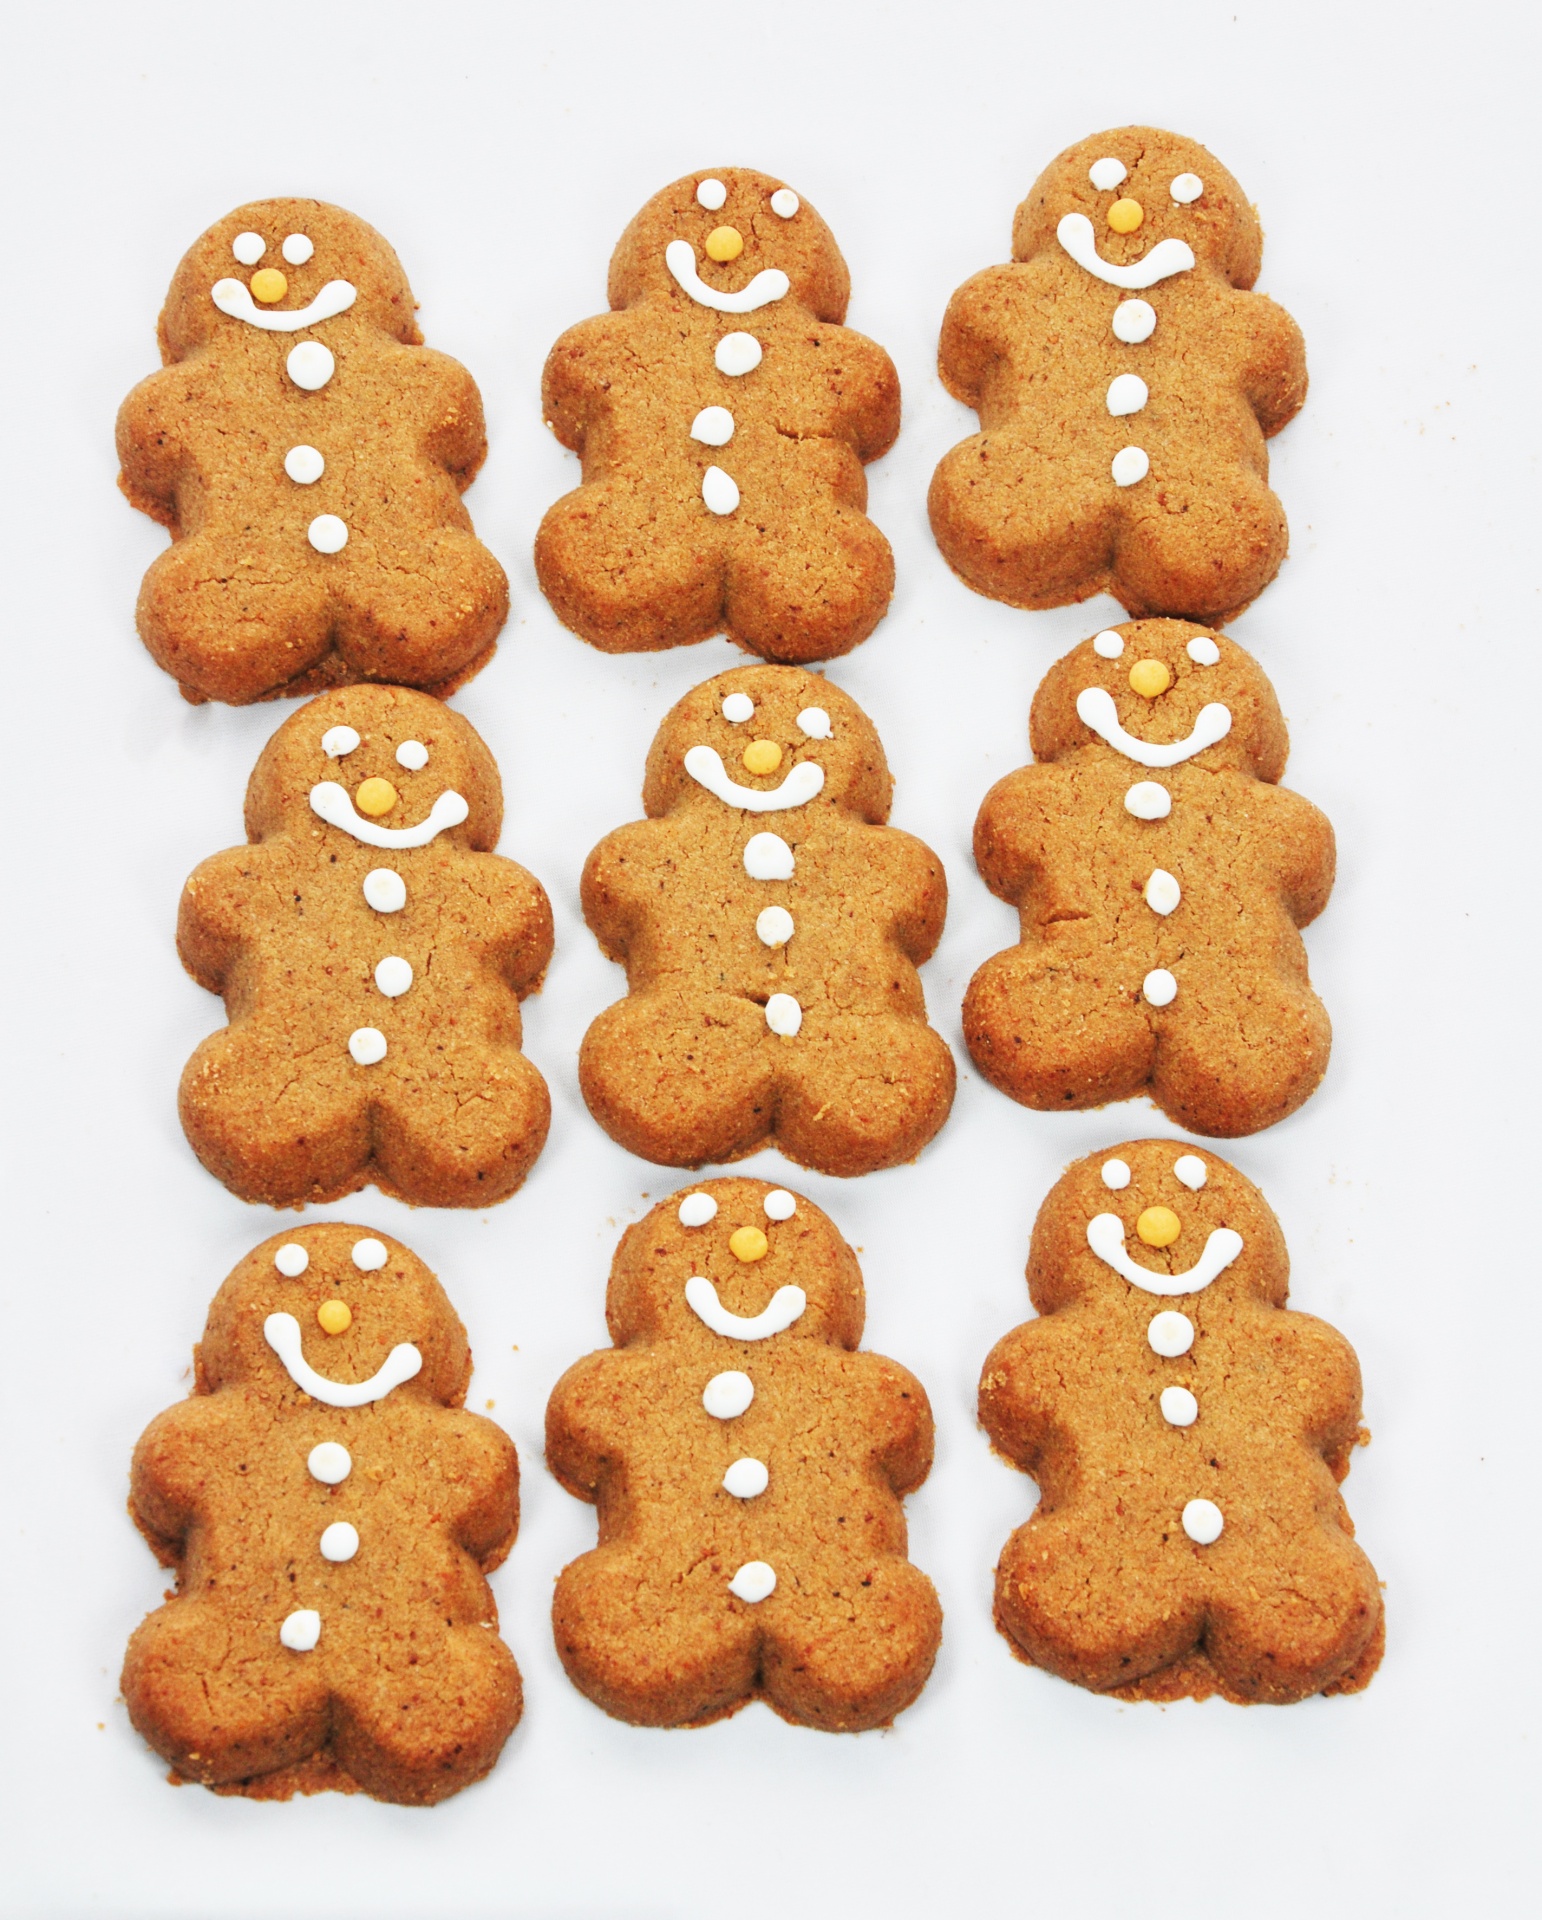 rows-of-gingerbread-cookies-free-stock-photo-public-domain-pictures